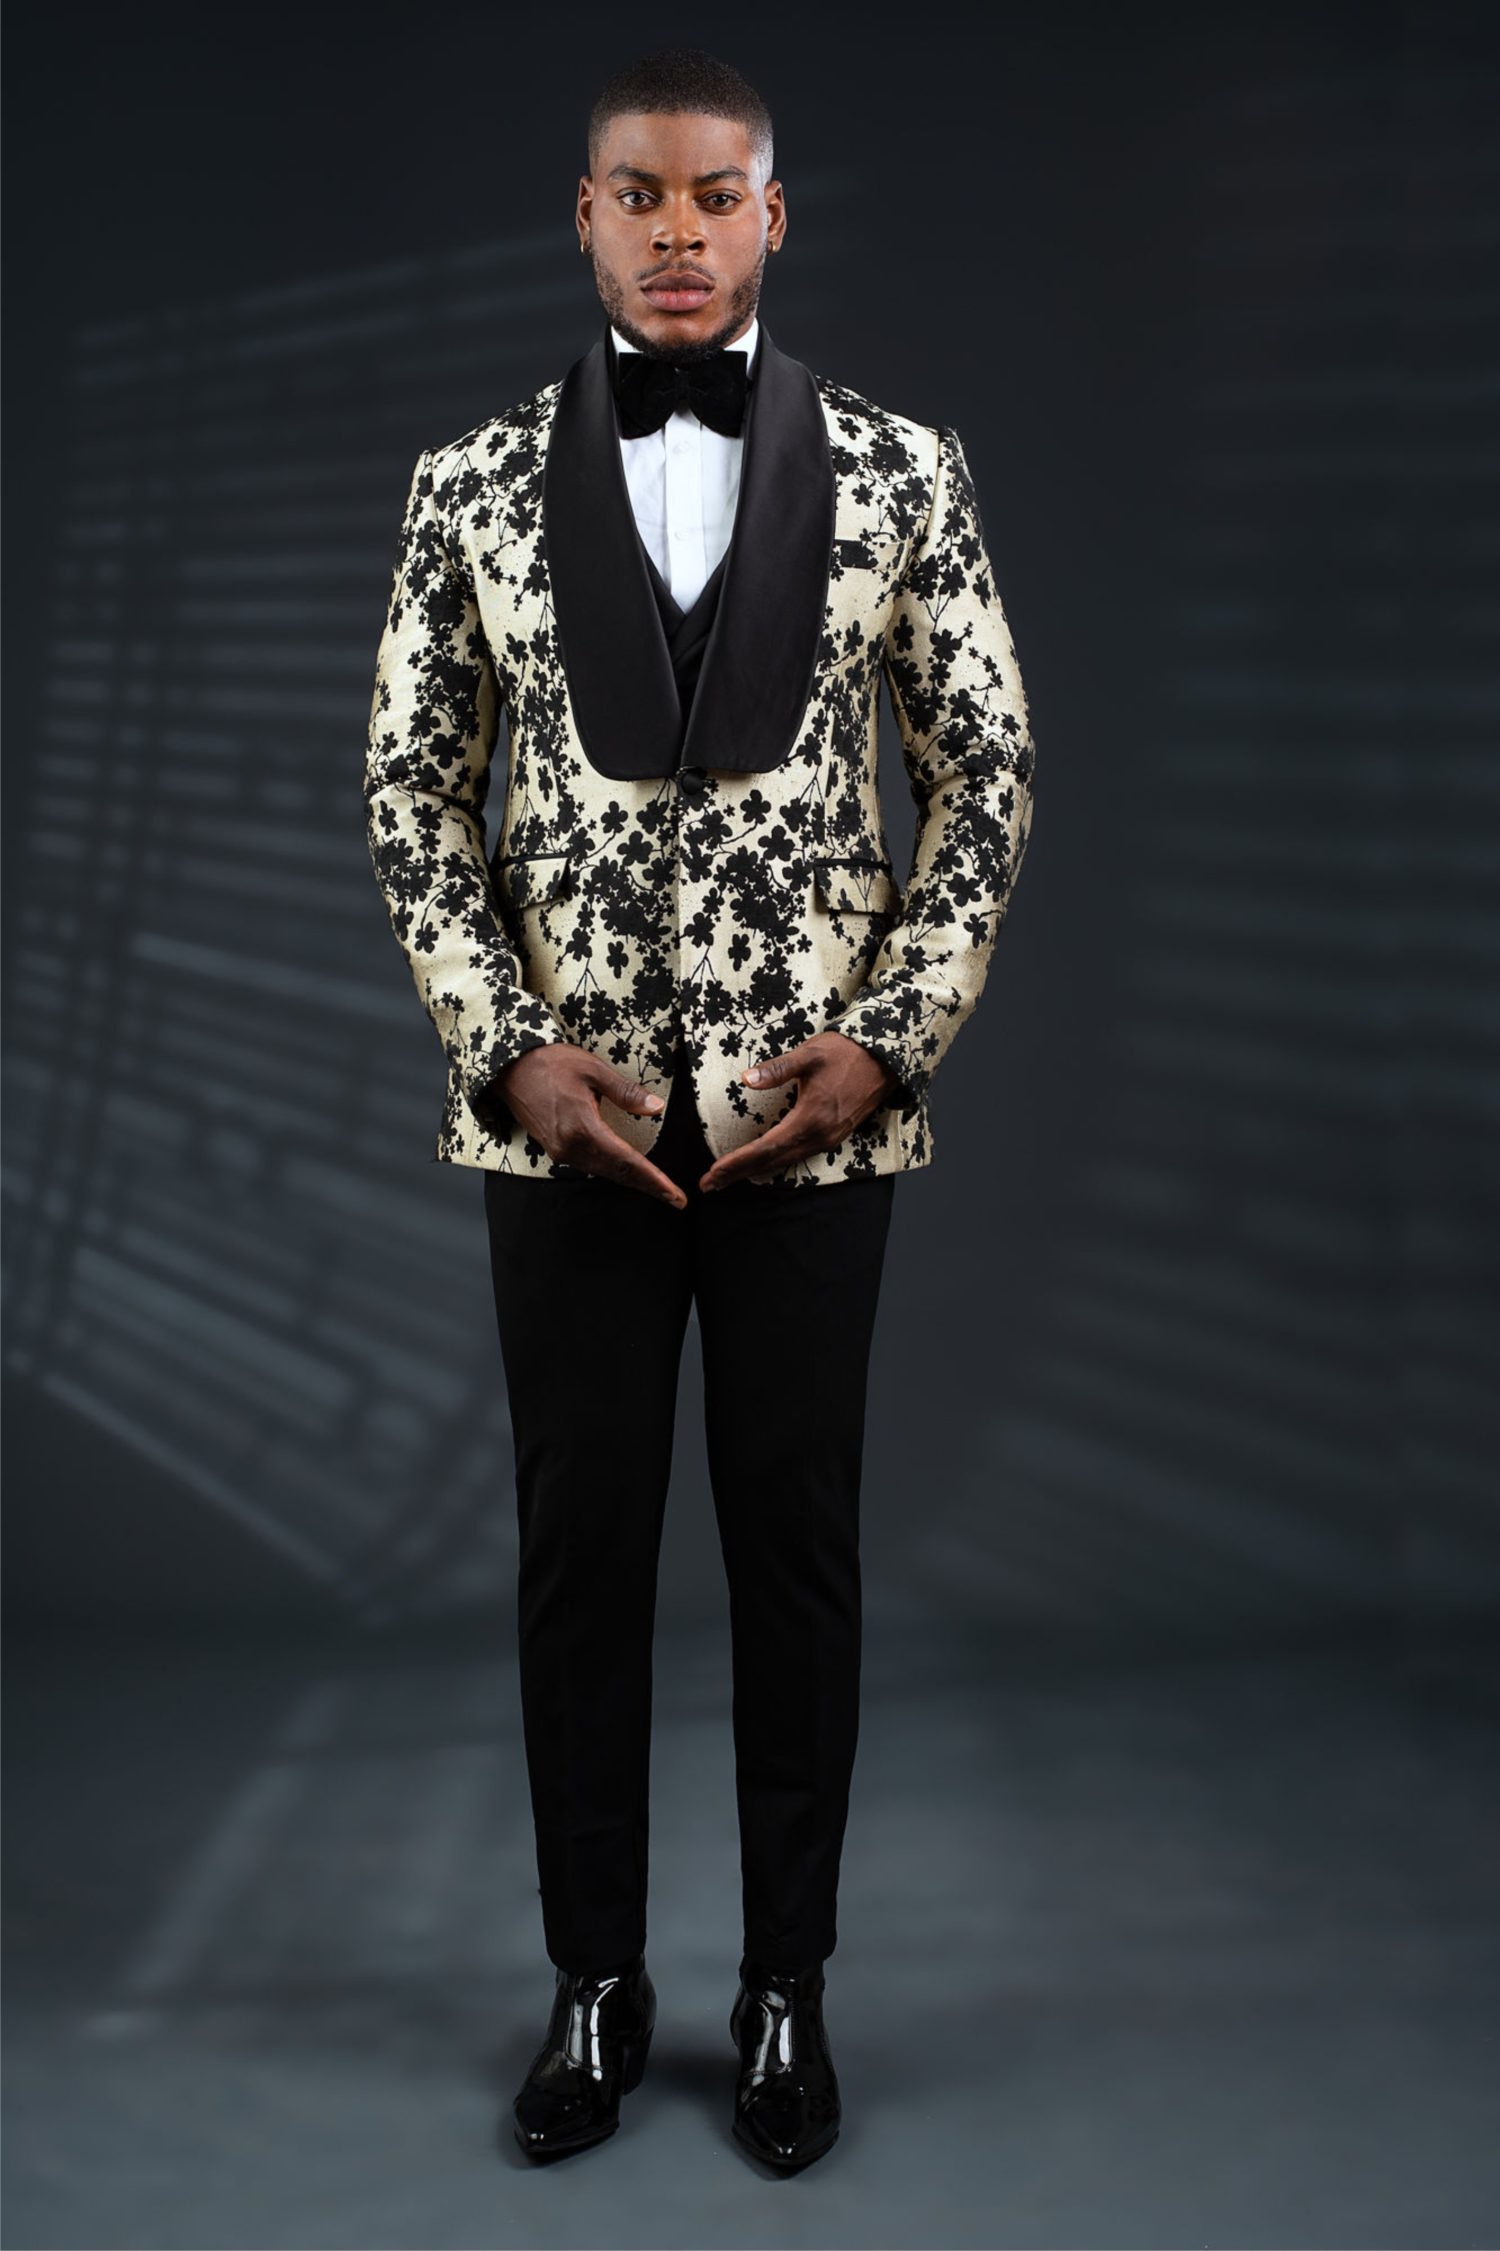 Ladies, Telvin Nwafor’s “Emerging” Collection is for the Stylish Man in Your Life